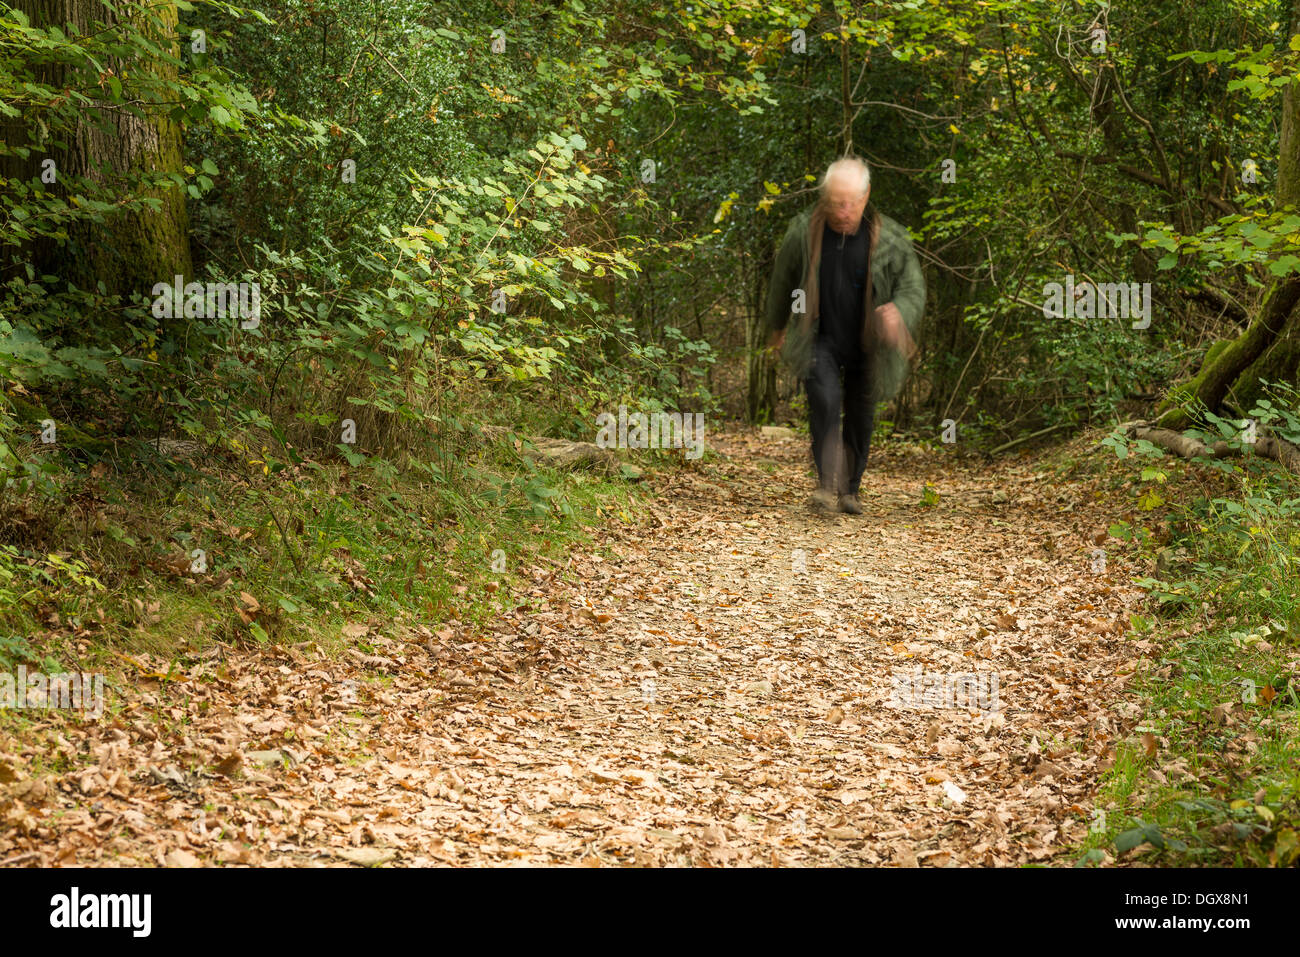 White or silver haired senior citizen in a hurry along a woodland path. Stock Photo